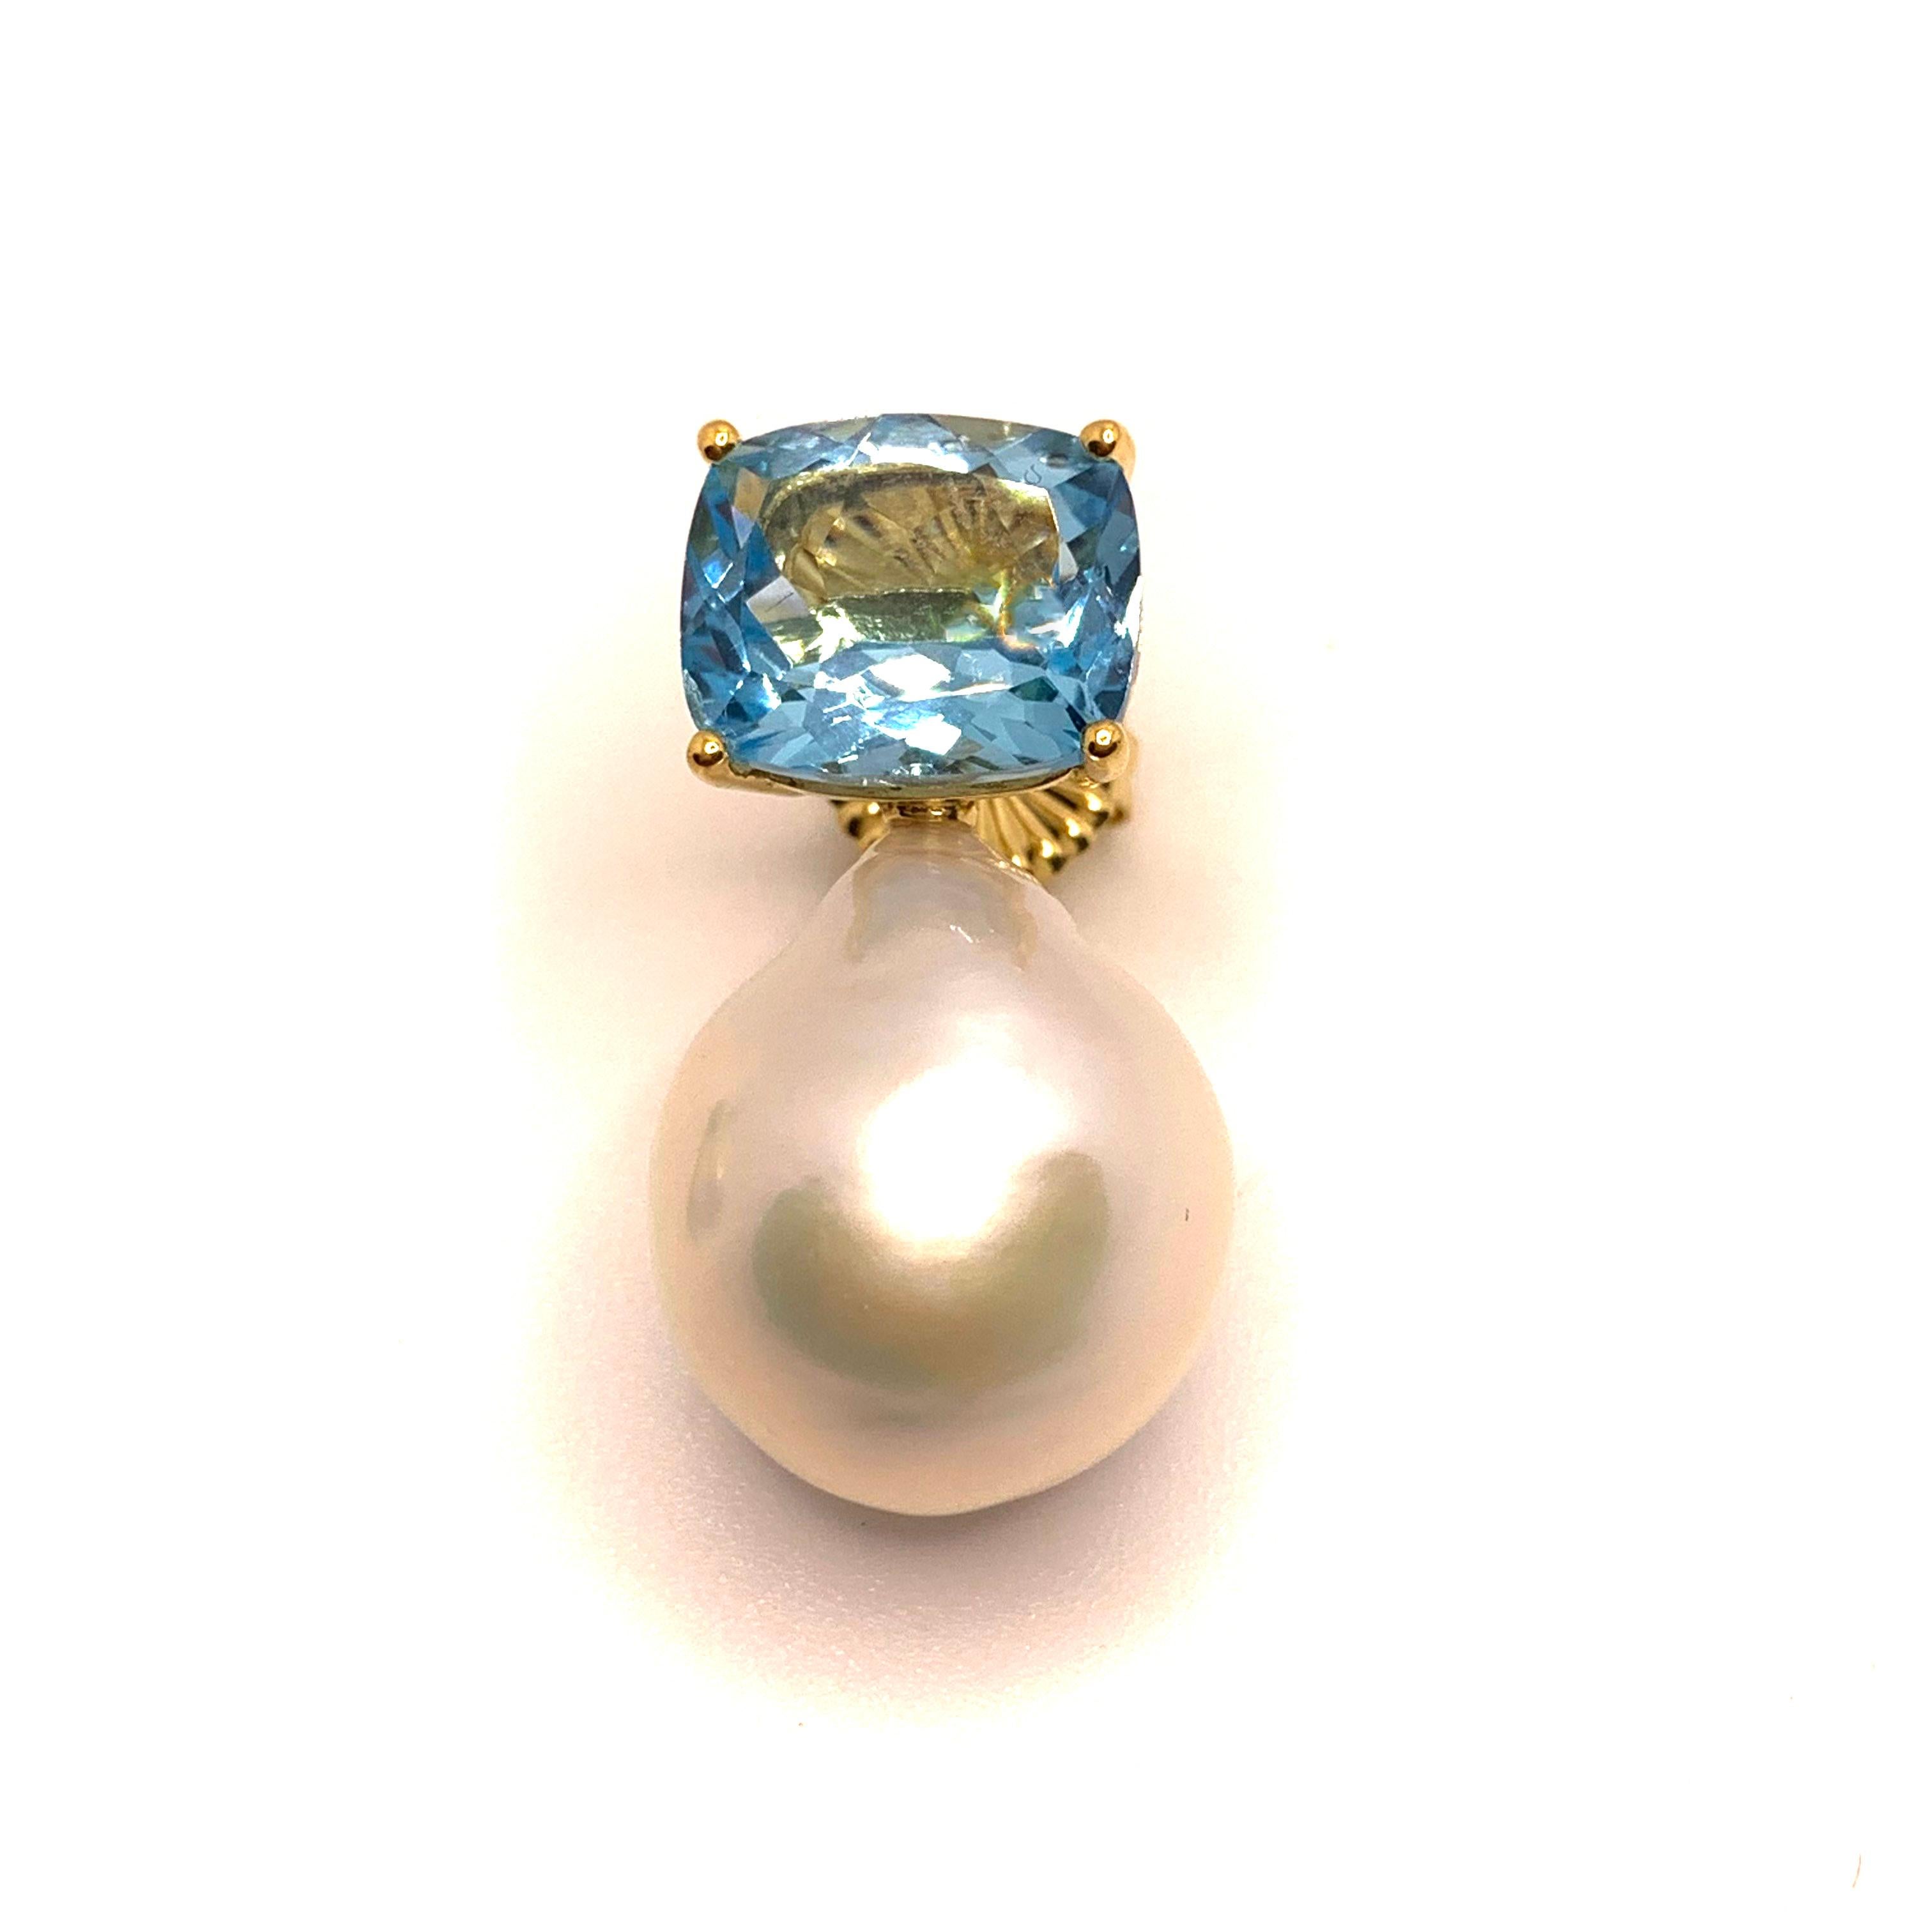 Contemporary Bijoux Num Cushion-cut Blue Topaz and White Cultured Baroque Pearl Drop Earrings